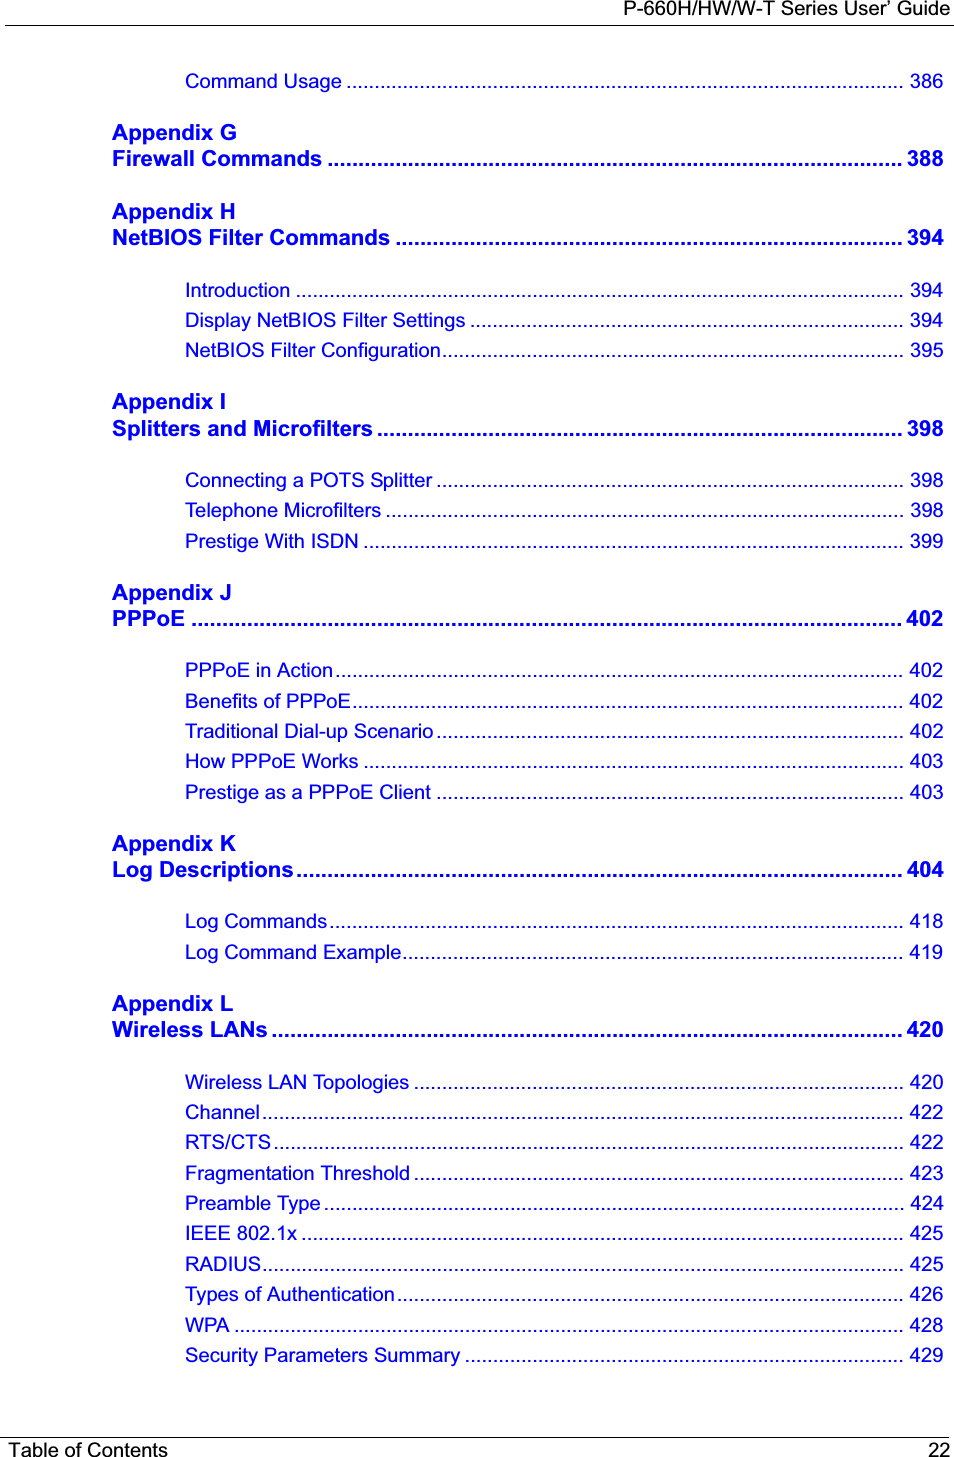 P-660H/HW/W-T Series User’ GuideTable of Contents 22Command Usage ................................................................................................... 386Appendix GFirewall Commands ............................................................................................. 388Appendix HNetBIOS Filter Commands .................................................................................. 394Introduction ............................................................................................................ 394Display NetBIOS Filter Settings ............................................................................. 394NetBIOS Filter Configuration.................................................................................. 395Appendix ISplitters and Microfilters ..................................................................................... 398Connecting a POTS Splitter ................................................................................... 398Telephone Microfilters ............................................................................................ 398Prestige With ISDN ................................................................................................ 399Appendix JPPPoE ................................................................................................................... 402PPPoE in Action..................................................................................................... 402Benefits of PPPoE.................................................................................................. 402Traditional Dial-up Scenario ................................................................................... 402How PPPoE Works ................................................................................................ 403Prestige as a PPPoE Client ................................................................................... 403Appendix KLog Descriptions.................................................................................................. 404Log Commands...................................................................................................... 418Log Command Example......................................................................................... 419Appendix LWireless LANs ...................................................................................................... 420Wireless LAN Topologies ....................................................................................... 420Channel.................................................................................................................. 422RTS/CTS................................................................................................................ 422Fragmentation Threshold ....................................................................................... 423Preamble Type ....................................................................................................... 424IEEE 802.1x ........................................................................................................... 425RADIUS.................................................................................................................. 425Types of Authentication.......................................................................................... 426WPA ....................................................................................................................... 428Security Parameters Summary .............................................................................. 429